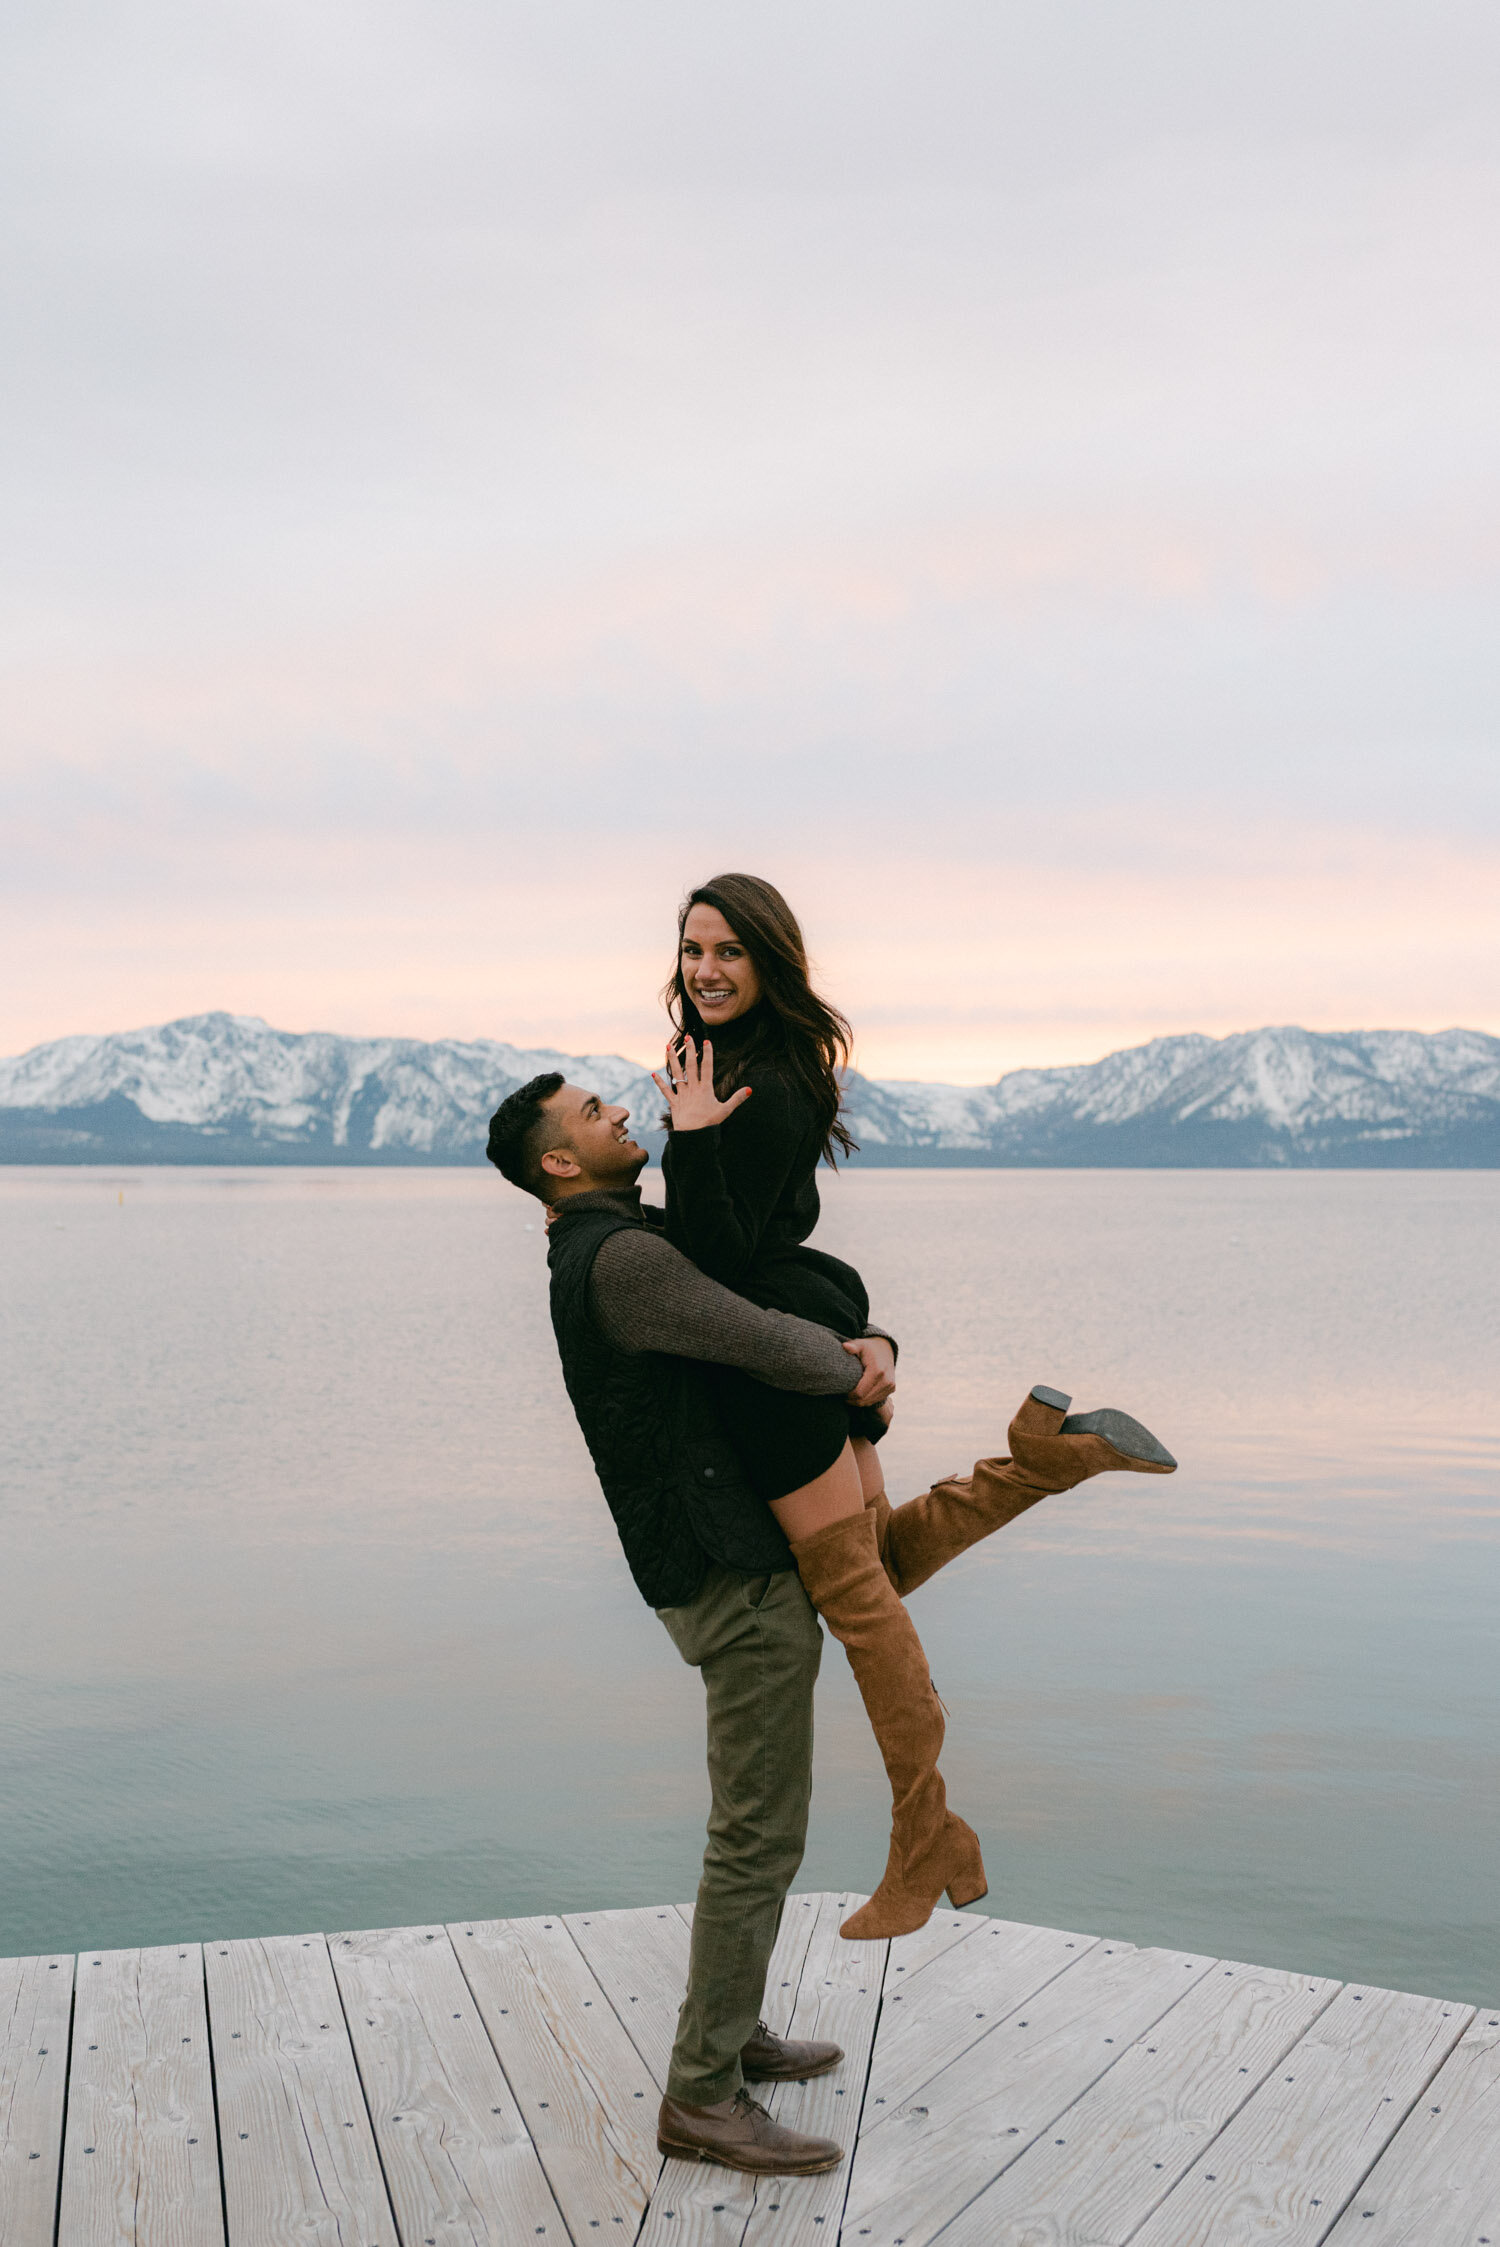 Lake Tahoe Proposal, with a surprise photographer, girl showing off her new ring